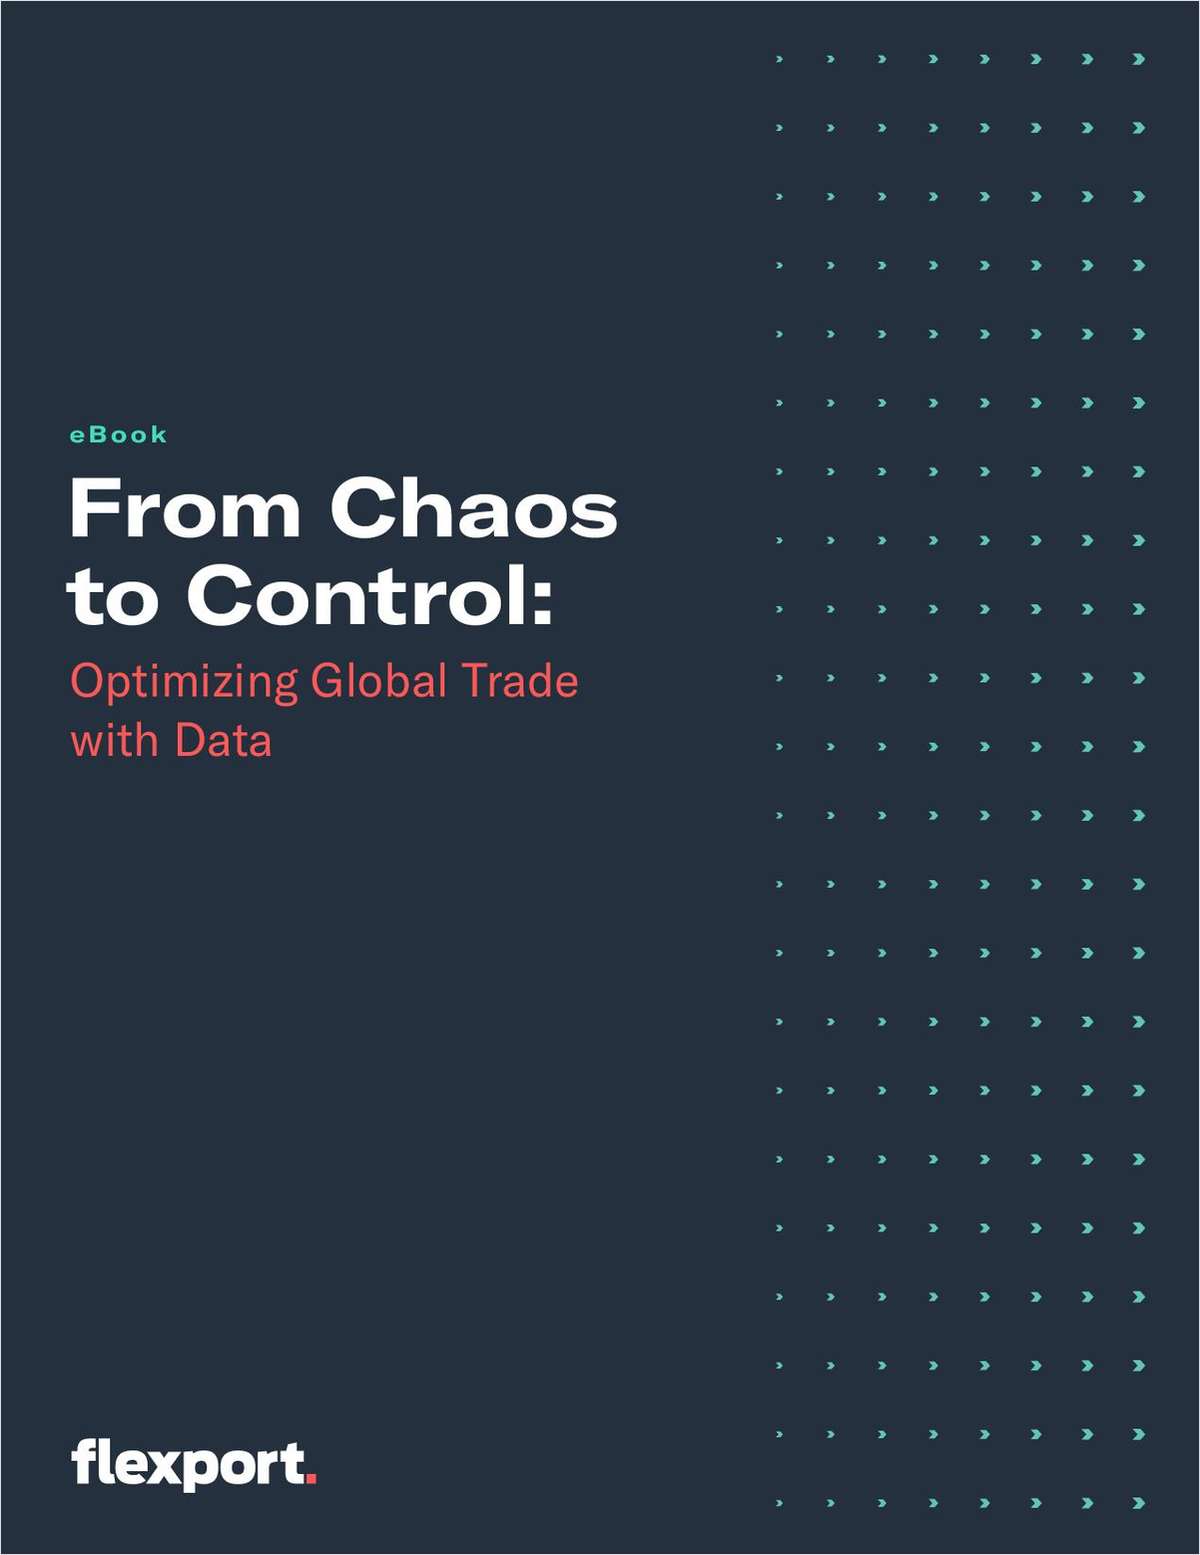 From Chaos to Control: Optimizing Global Trade with Data